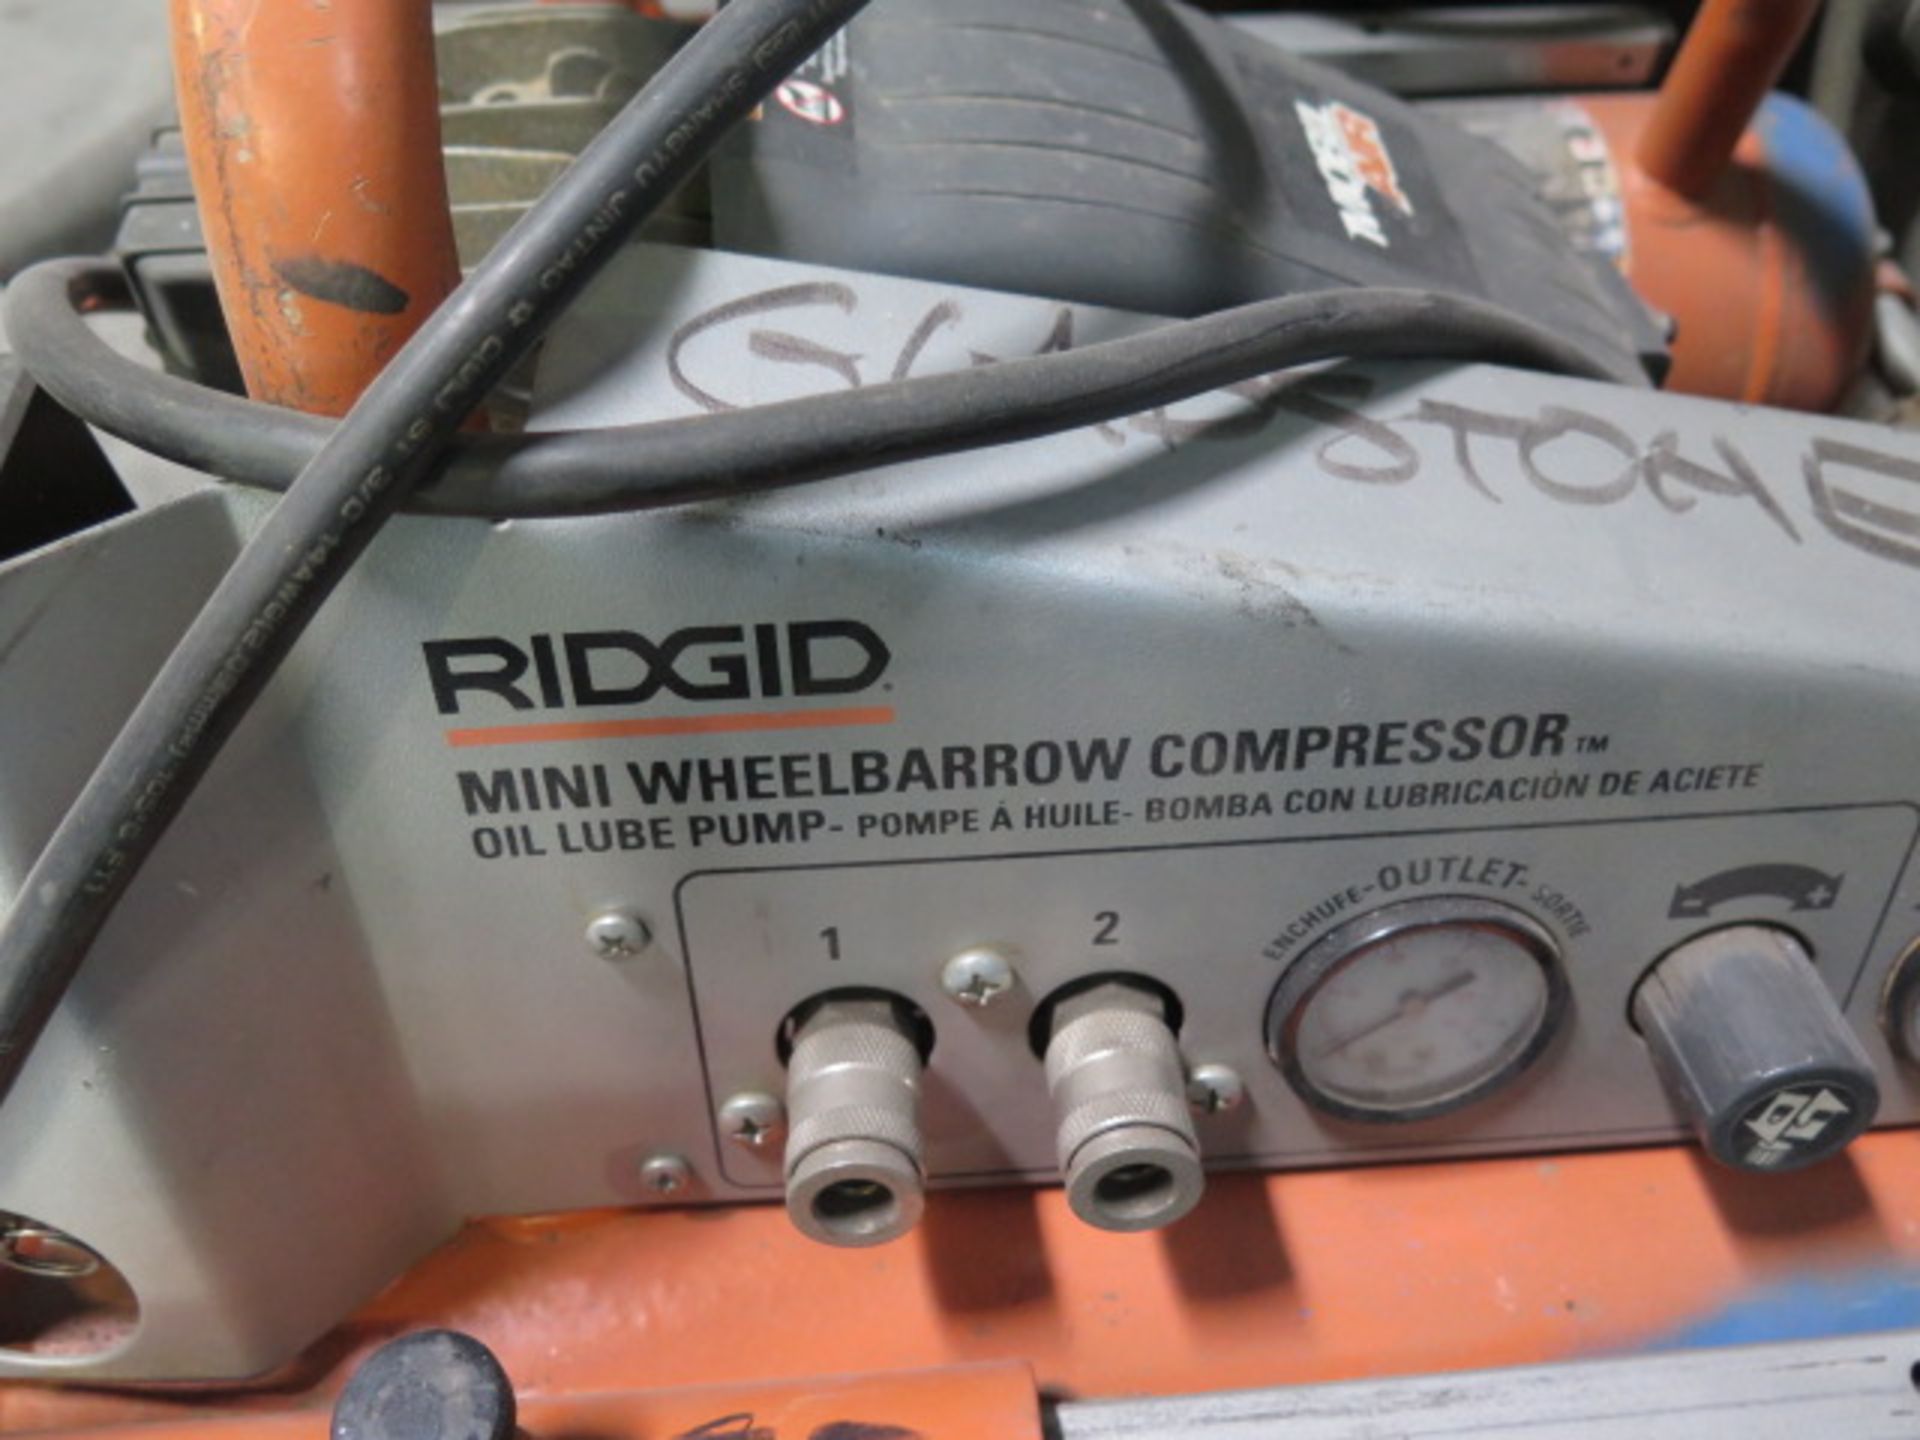 Speedaire and Ridgid Portable Air Compressors (SOLD AS-IS - NO WARRANTY) - Image 6 of 8